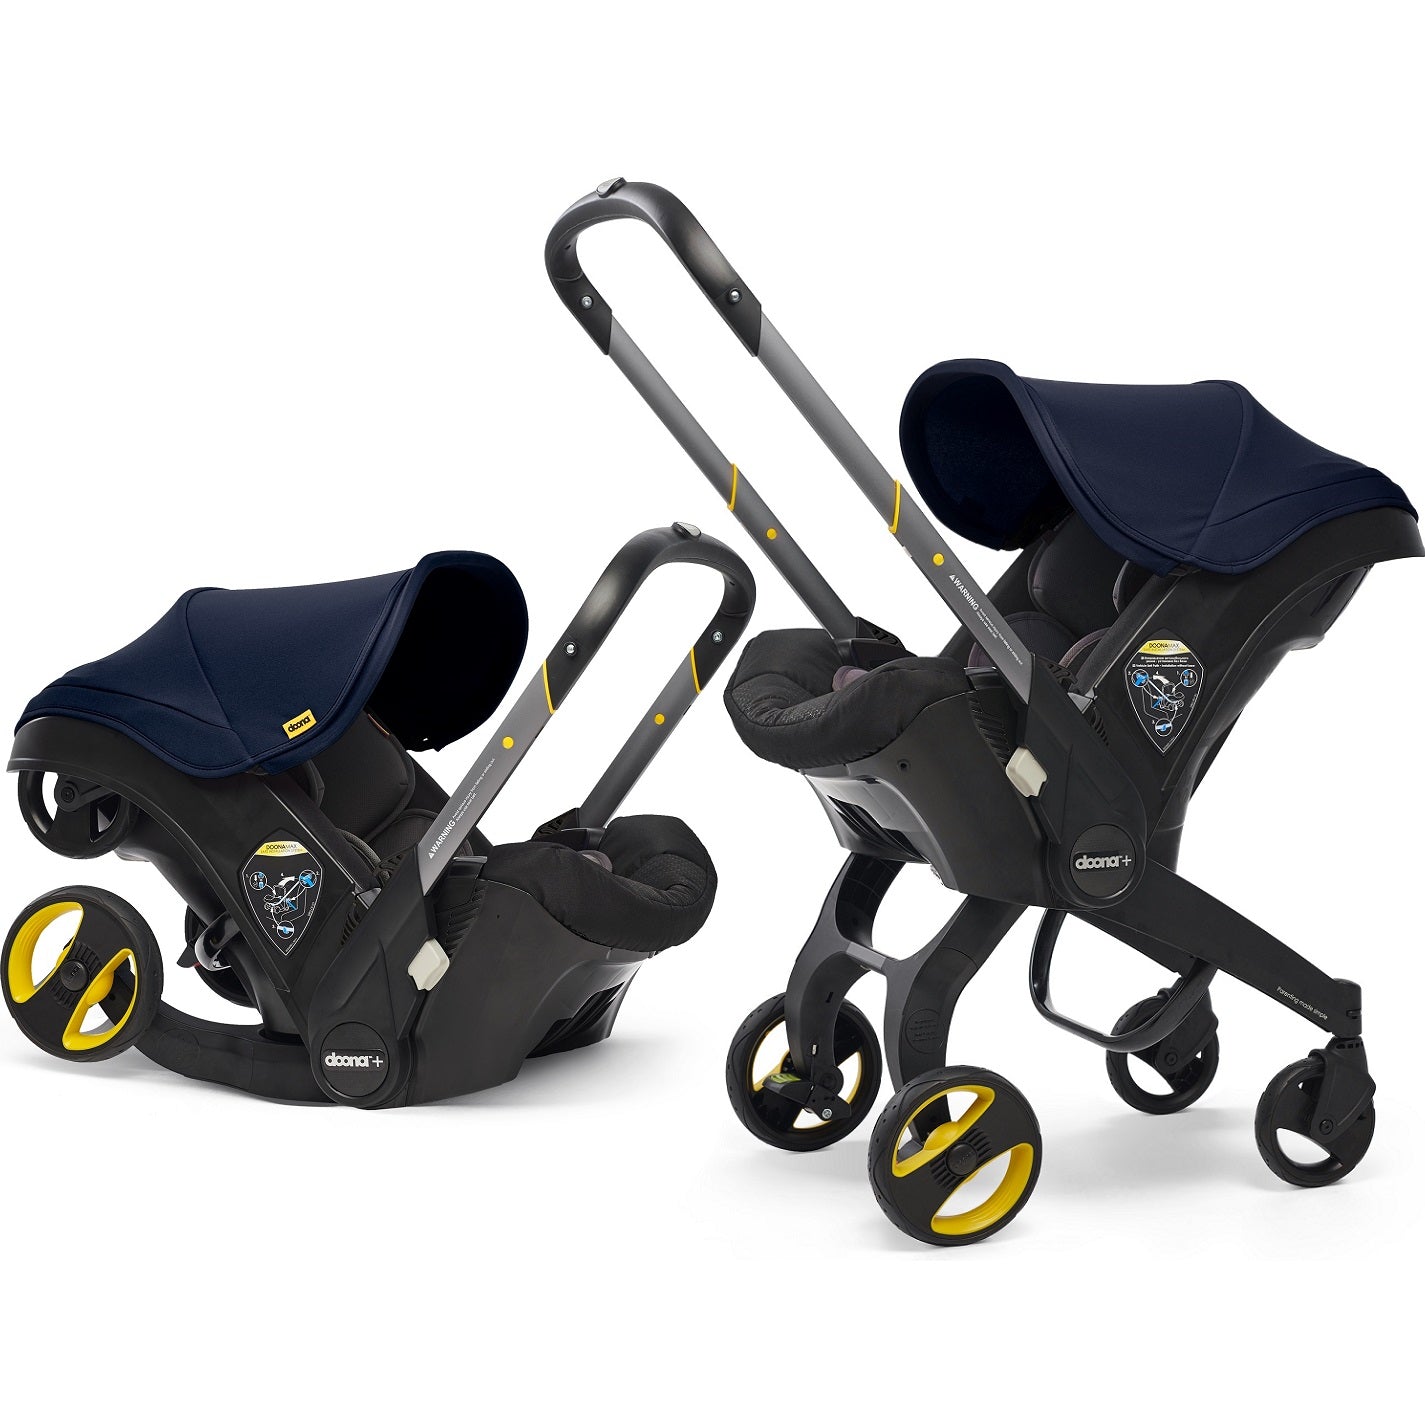 car seat that becomes a stroller